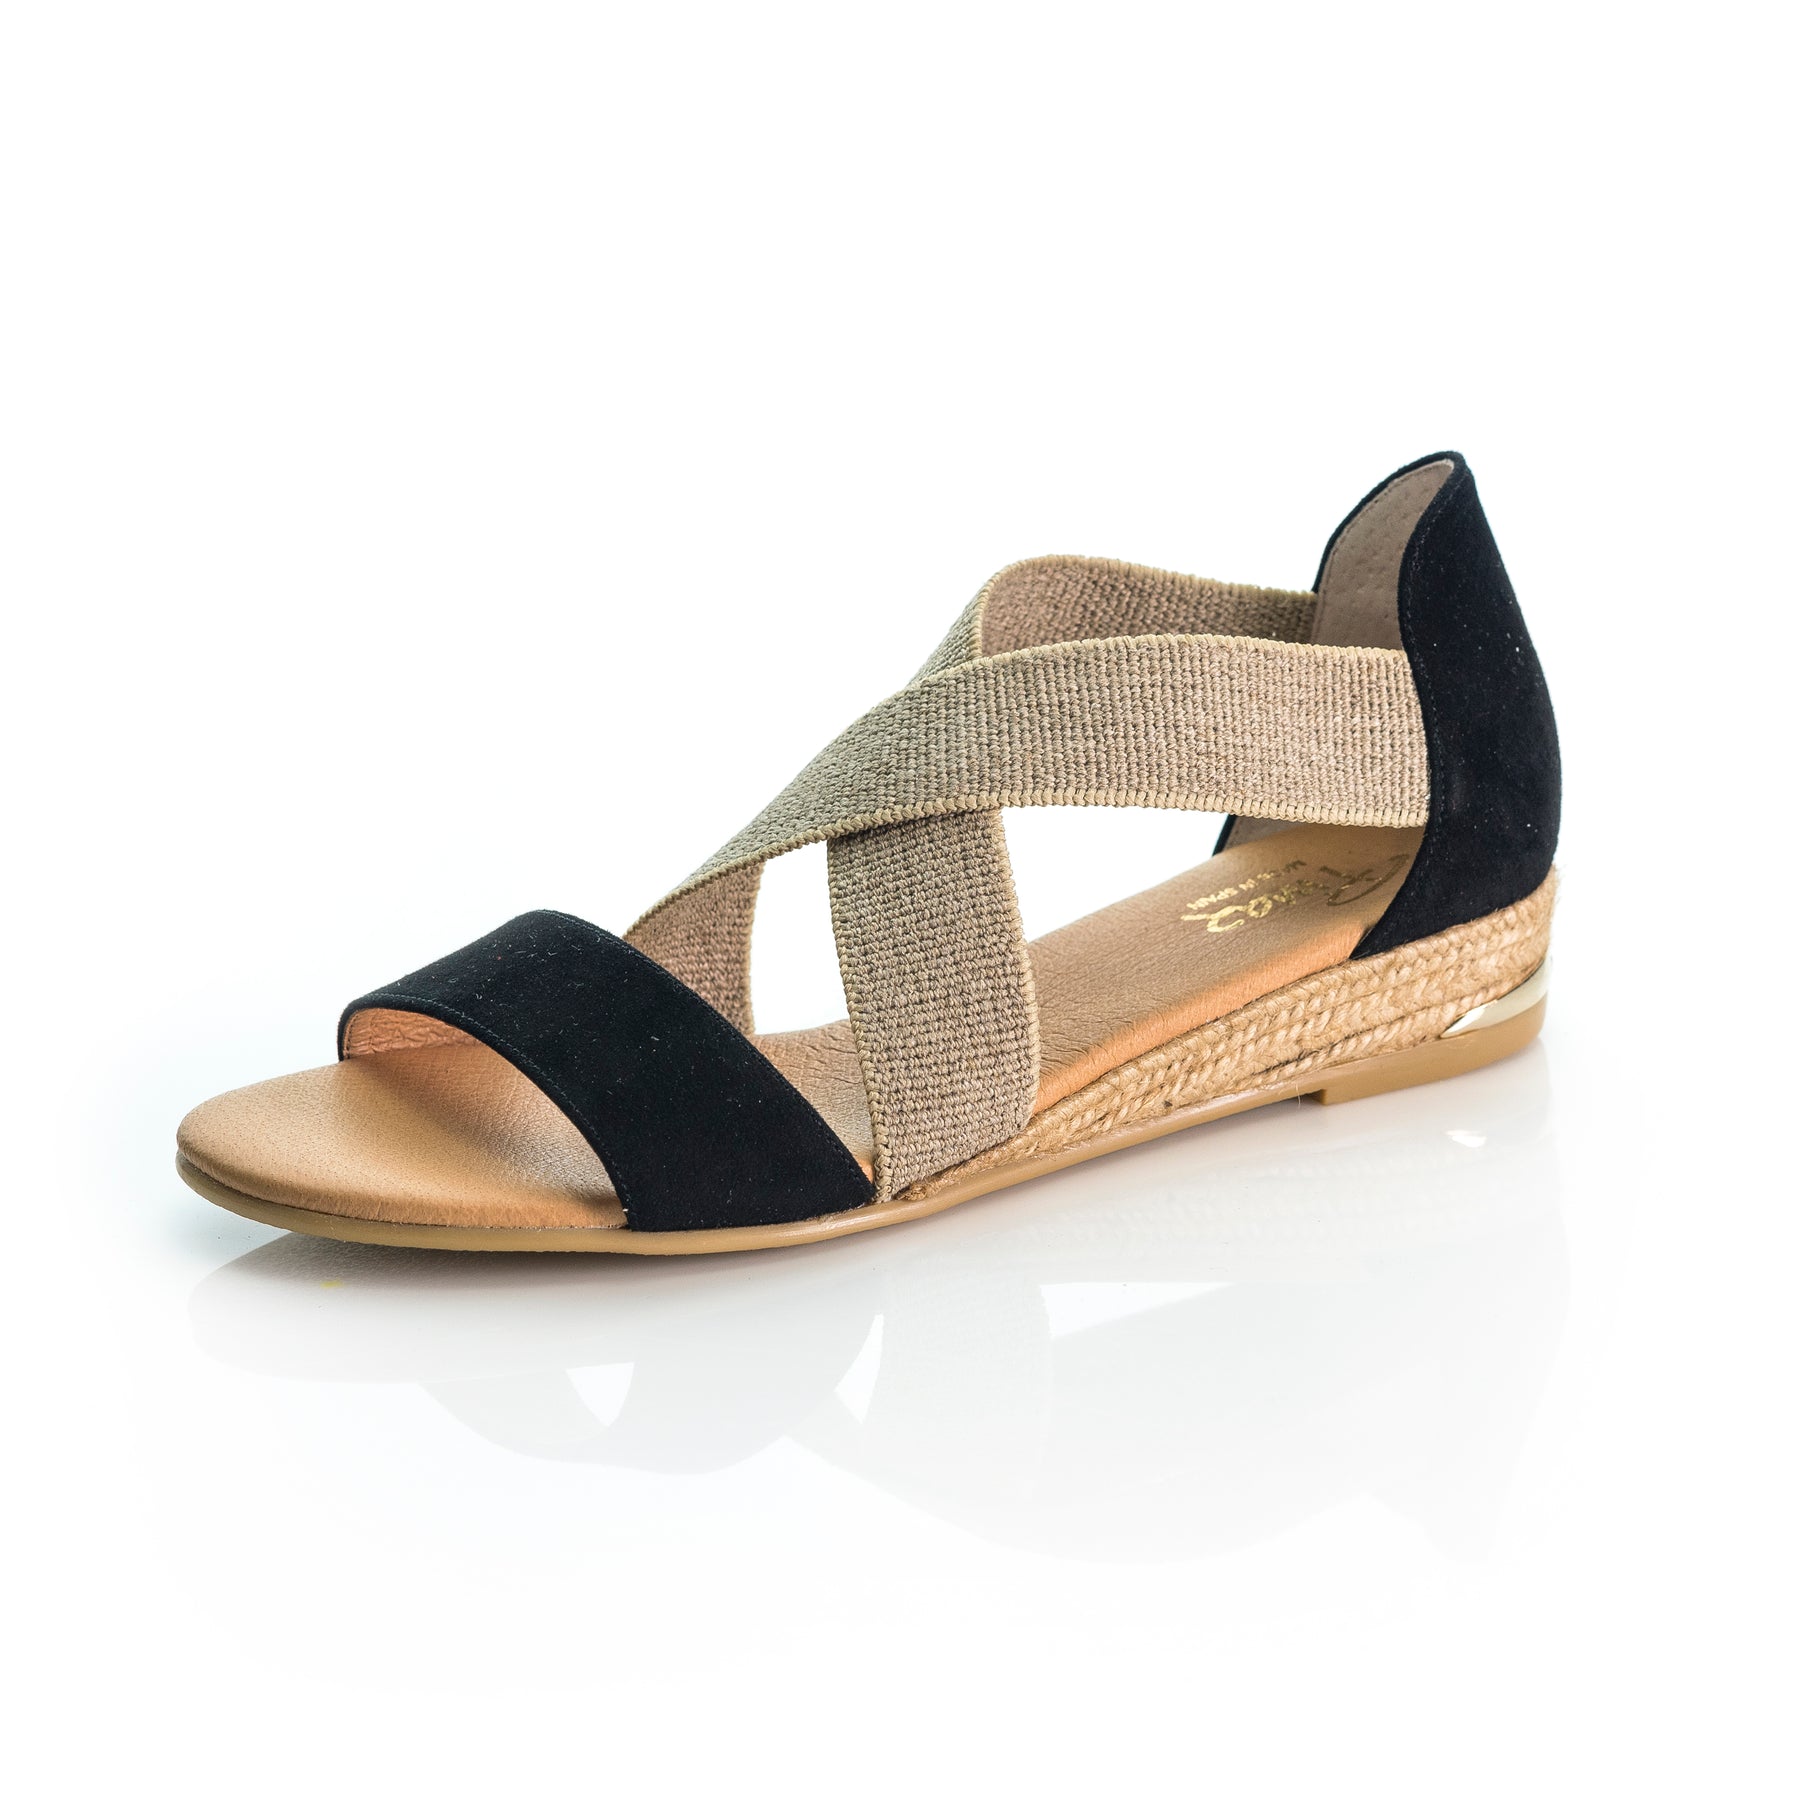 316-Flat dress sandal with heel in elasticated cross straps & rope detail sole